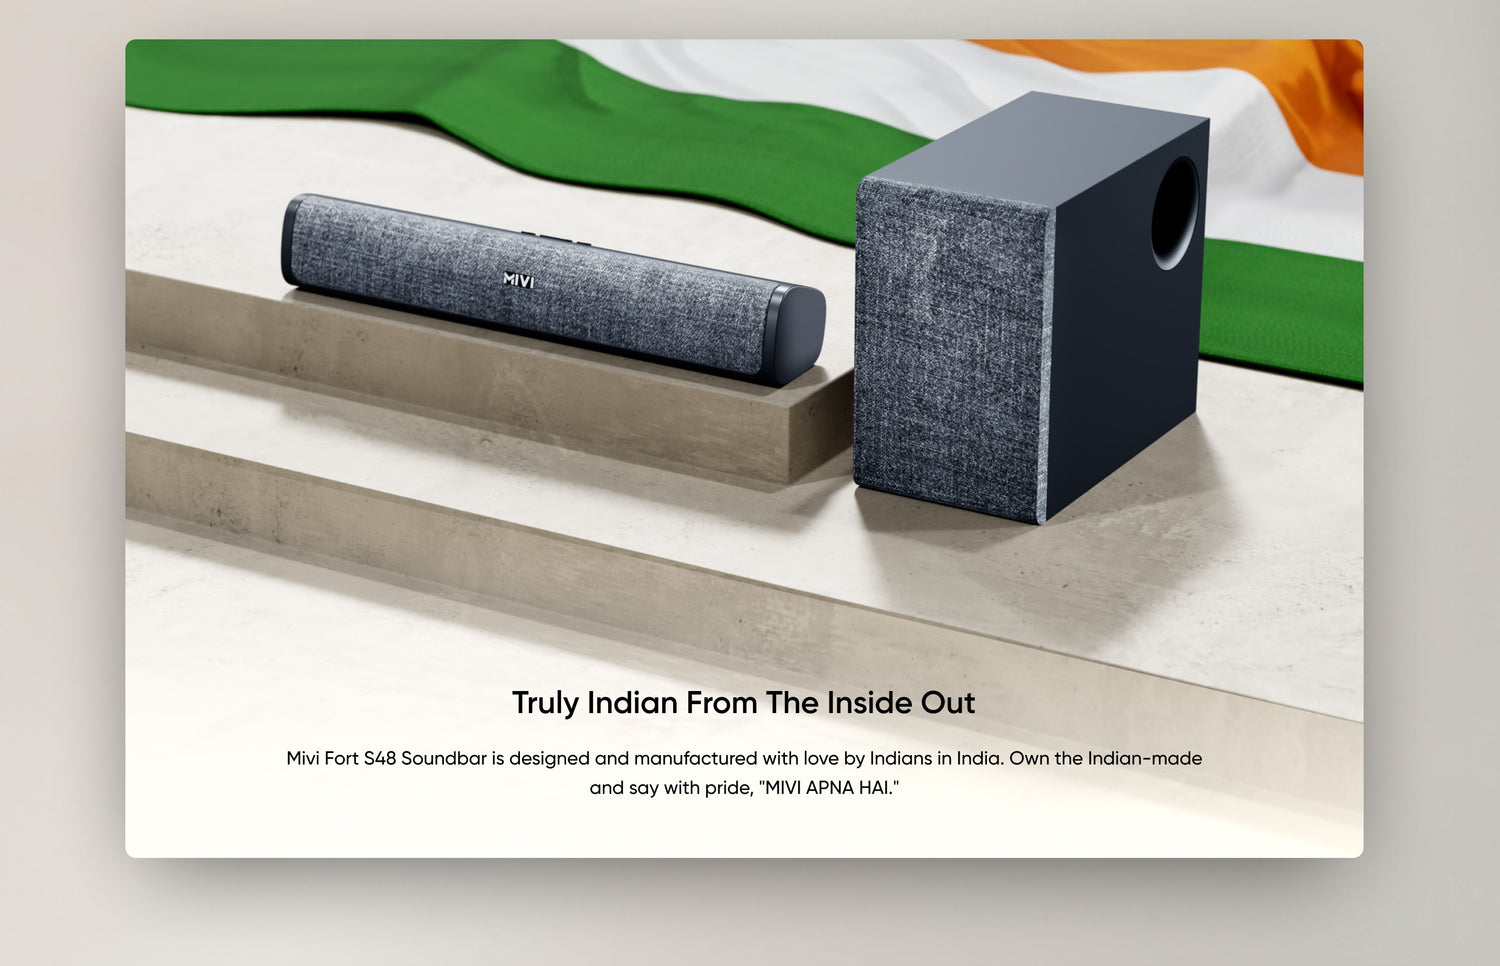 Truly Indian from The Inside Out - Mivi Fort S48 Soundbar is designed and manufactured with love by Indians in India. Own the Indian-made and say with pride, "MIVI APNA HAI."